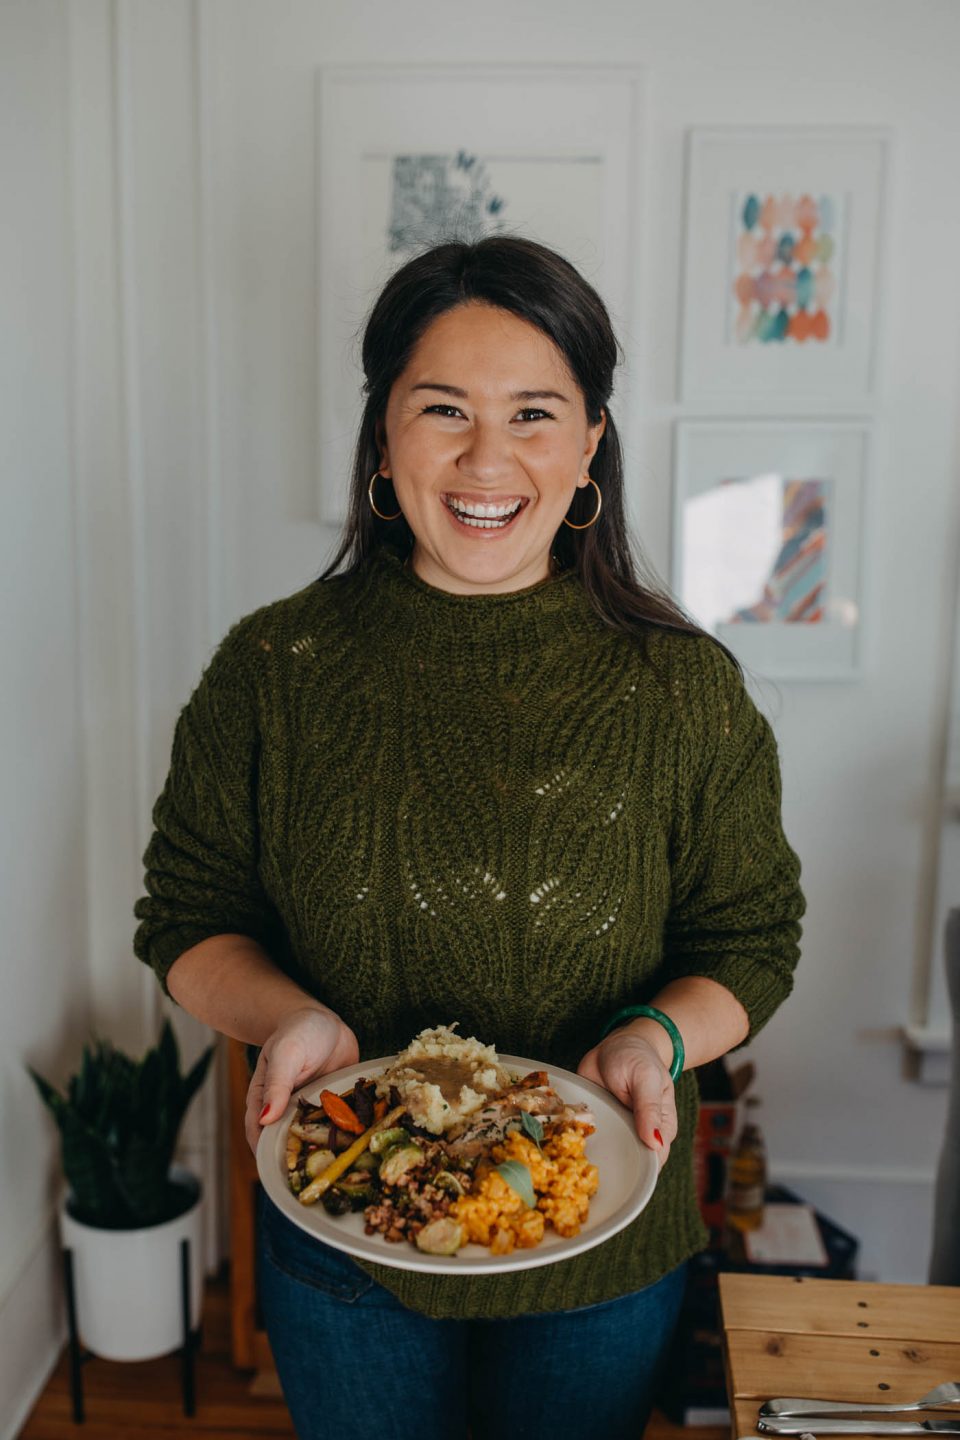 Dark-haired woman in a green sweater holds a plate of carved turkey, in front of a festive tablescape & a full Thanksgiving dinner spread.